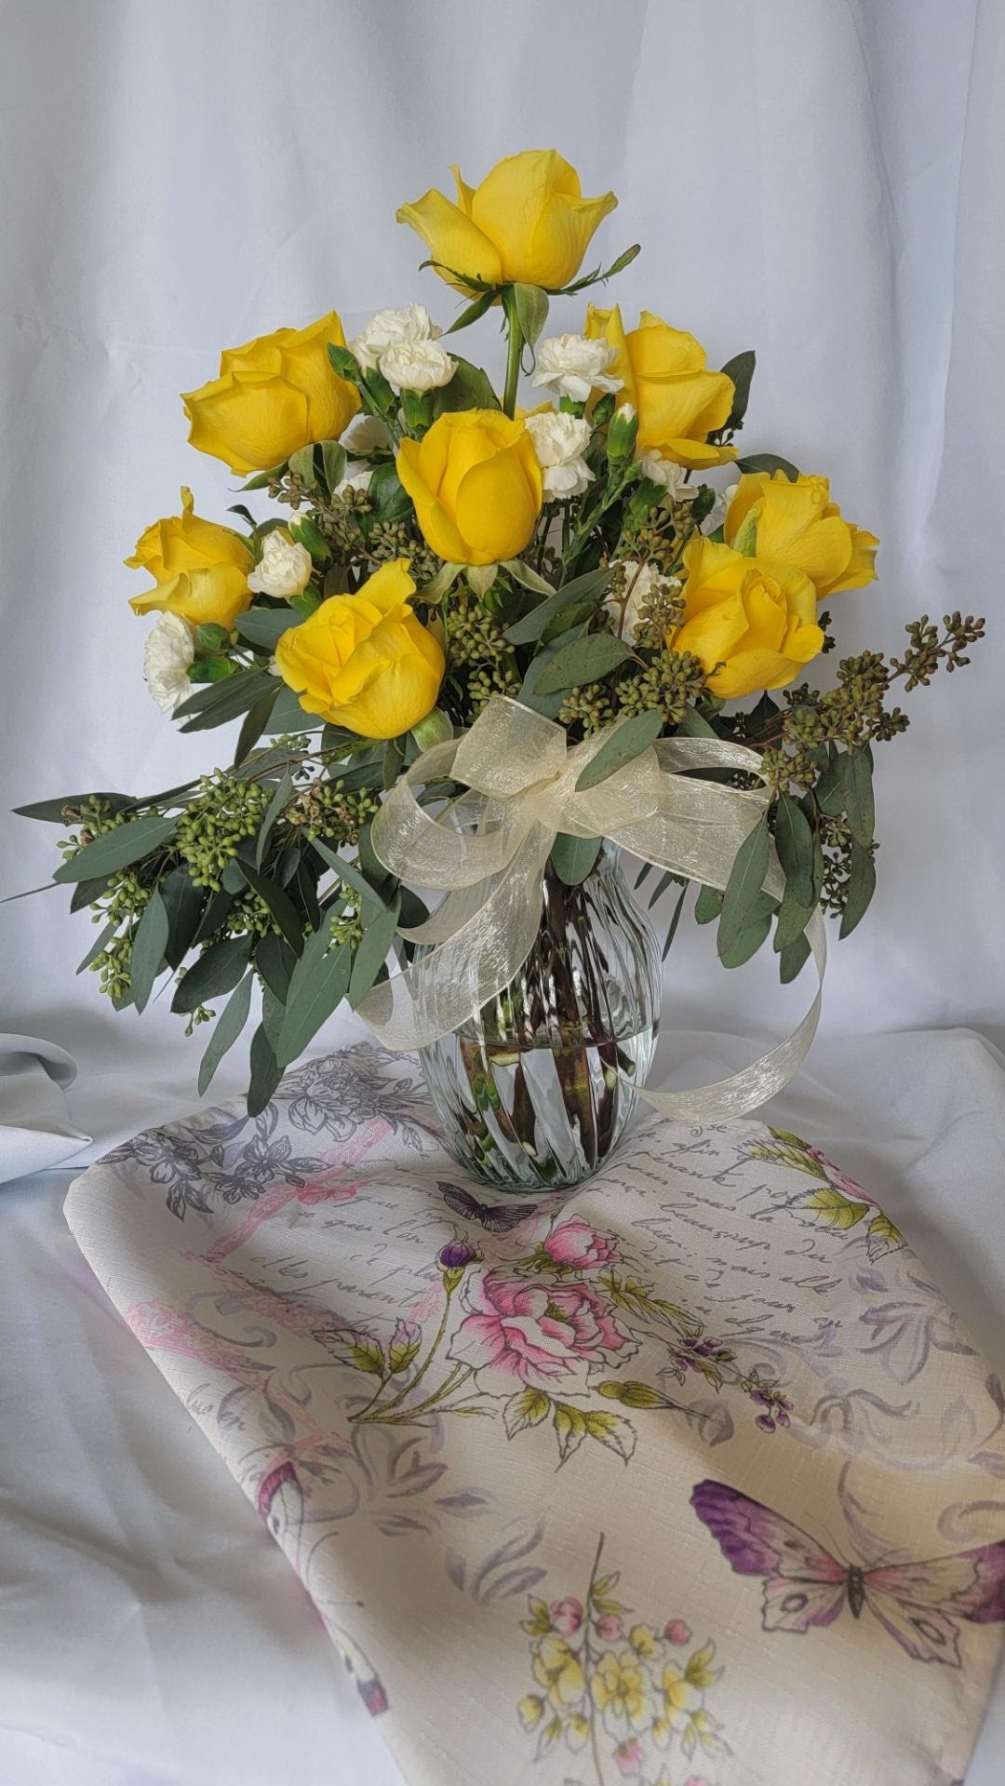 8 yellow roses and white carnations surrounded by seed eucalyptus n a